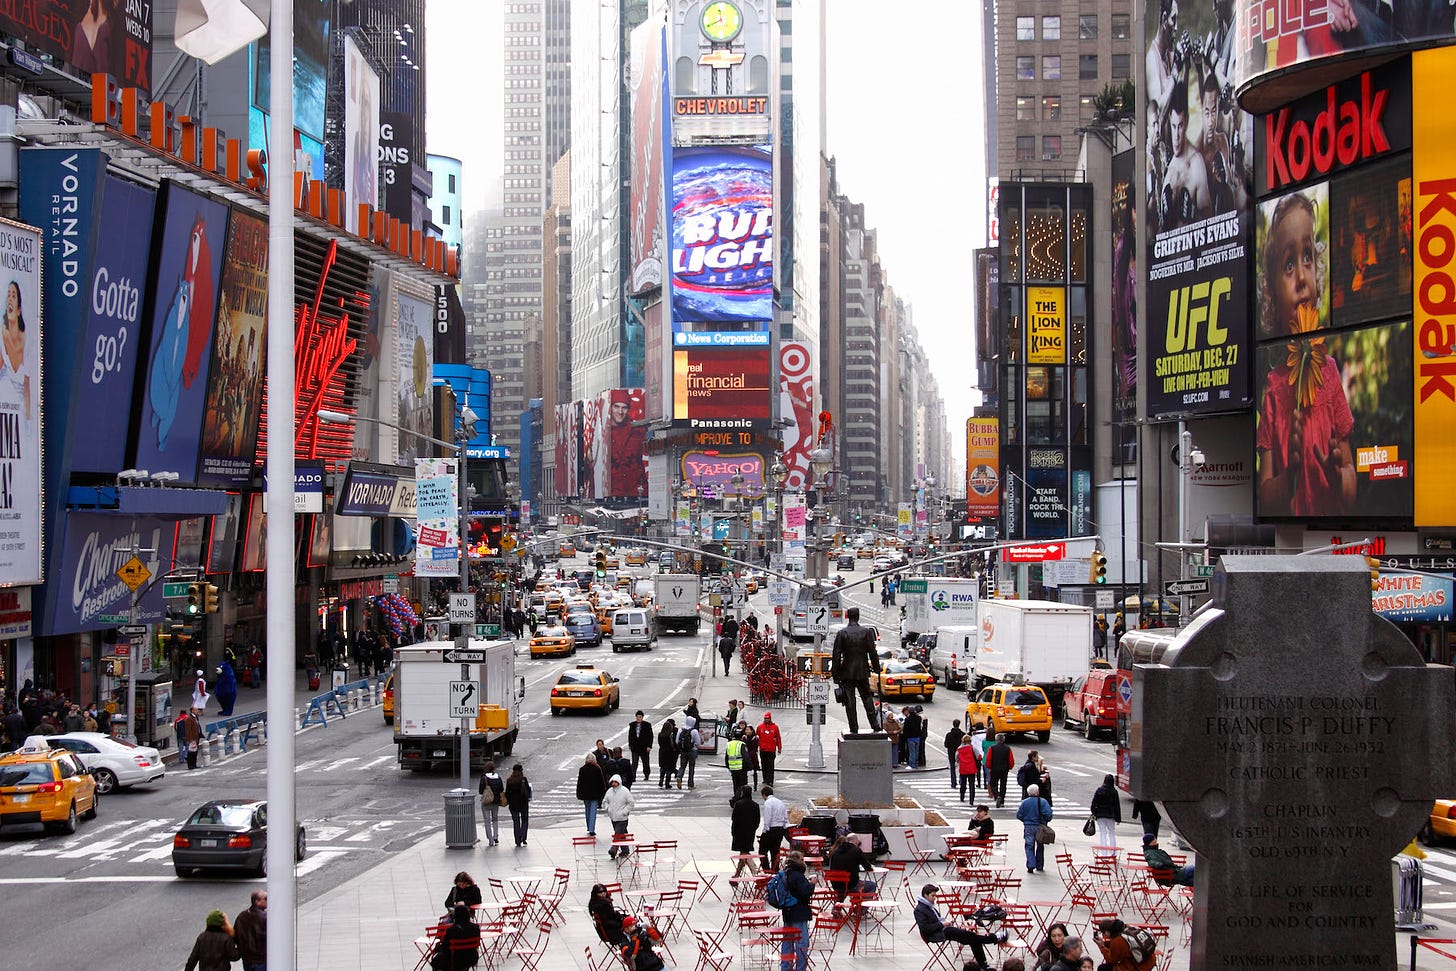 Street scene of Times Square in NYC, USA showing skyscrapers covered with ad billboards and flashing signs. Vehicles and pedestrians clog the streets below.   